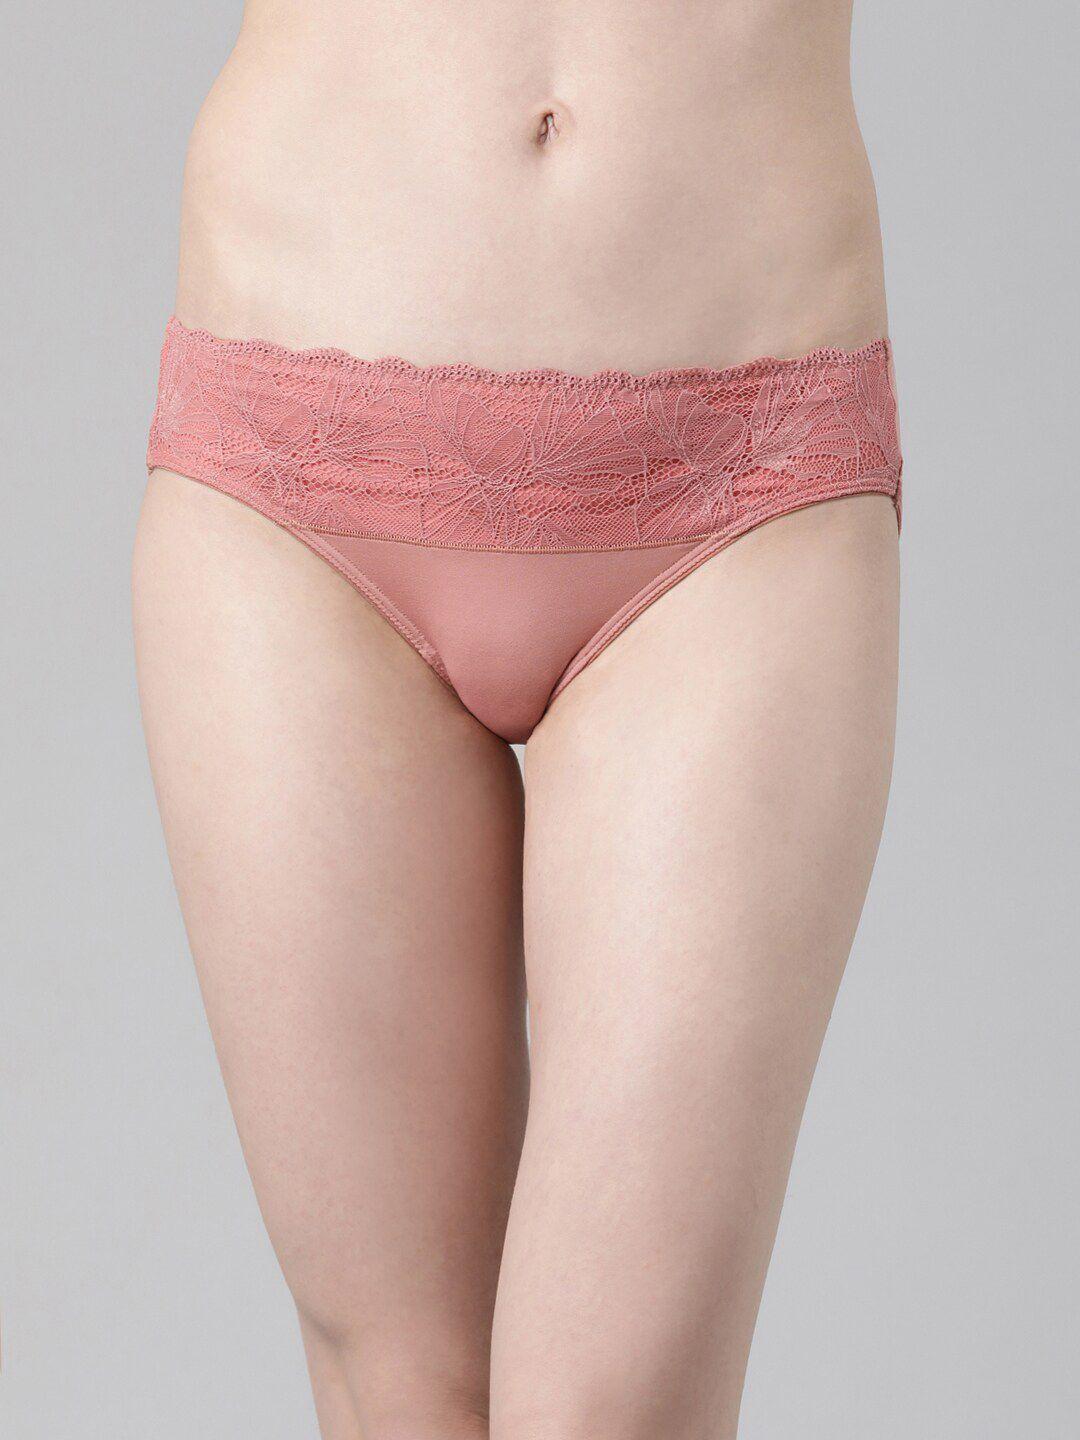 enamor-women-mid-rise-lace-detail-flat-elasticated-hipster-briefs-p116